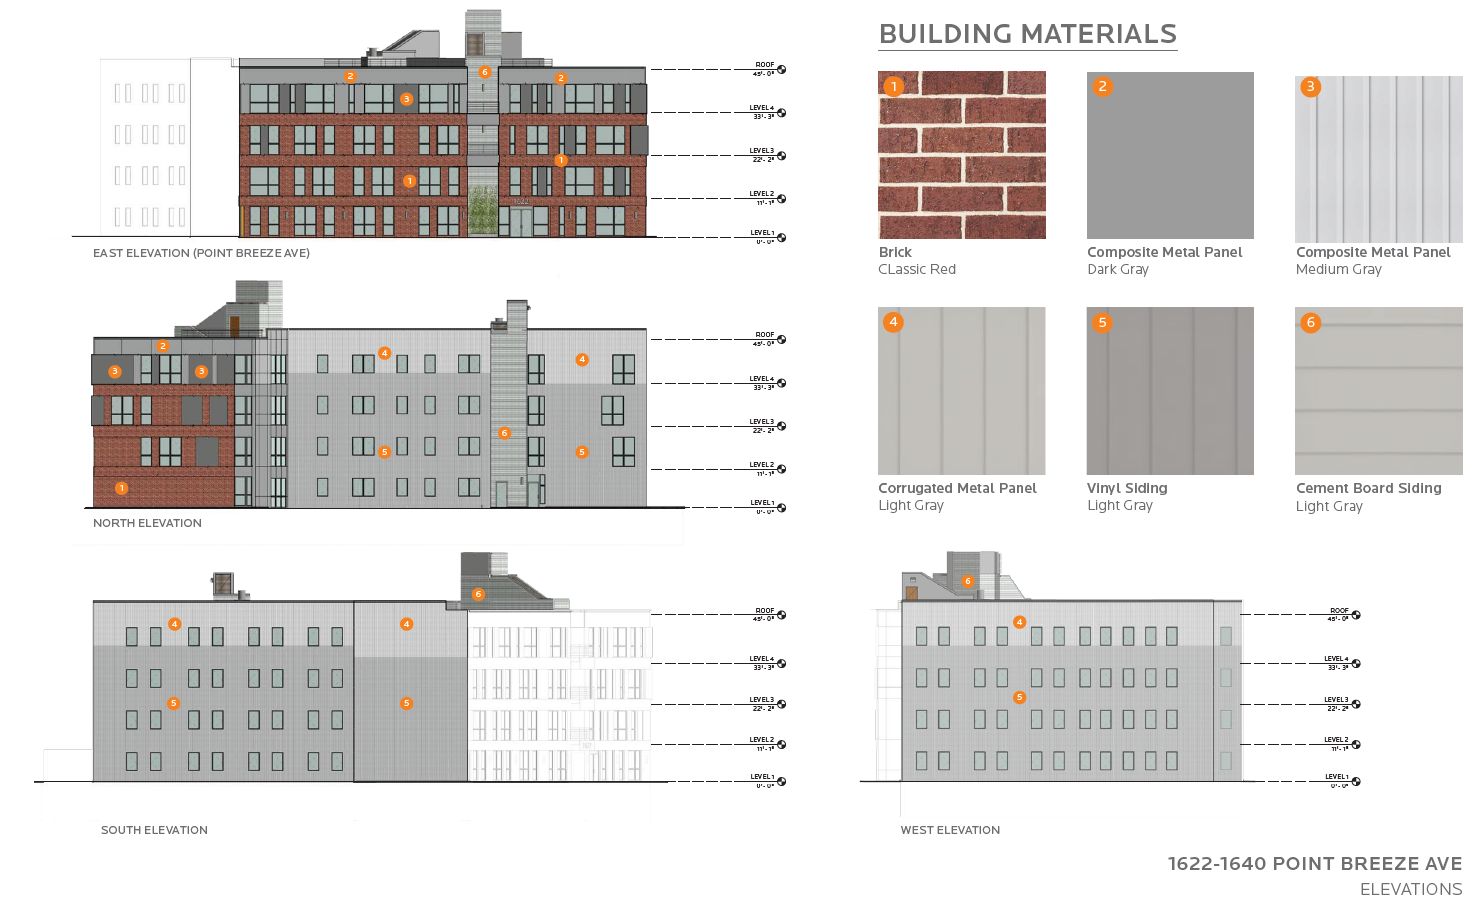 1622-40 Point Breeze Avenue. Exterior elevation and material schedule. Credit: JKRP Architects via the Civic Design Review